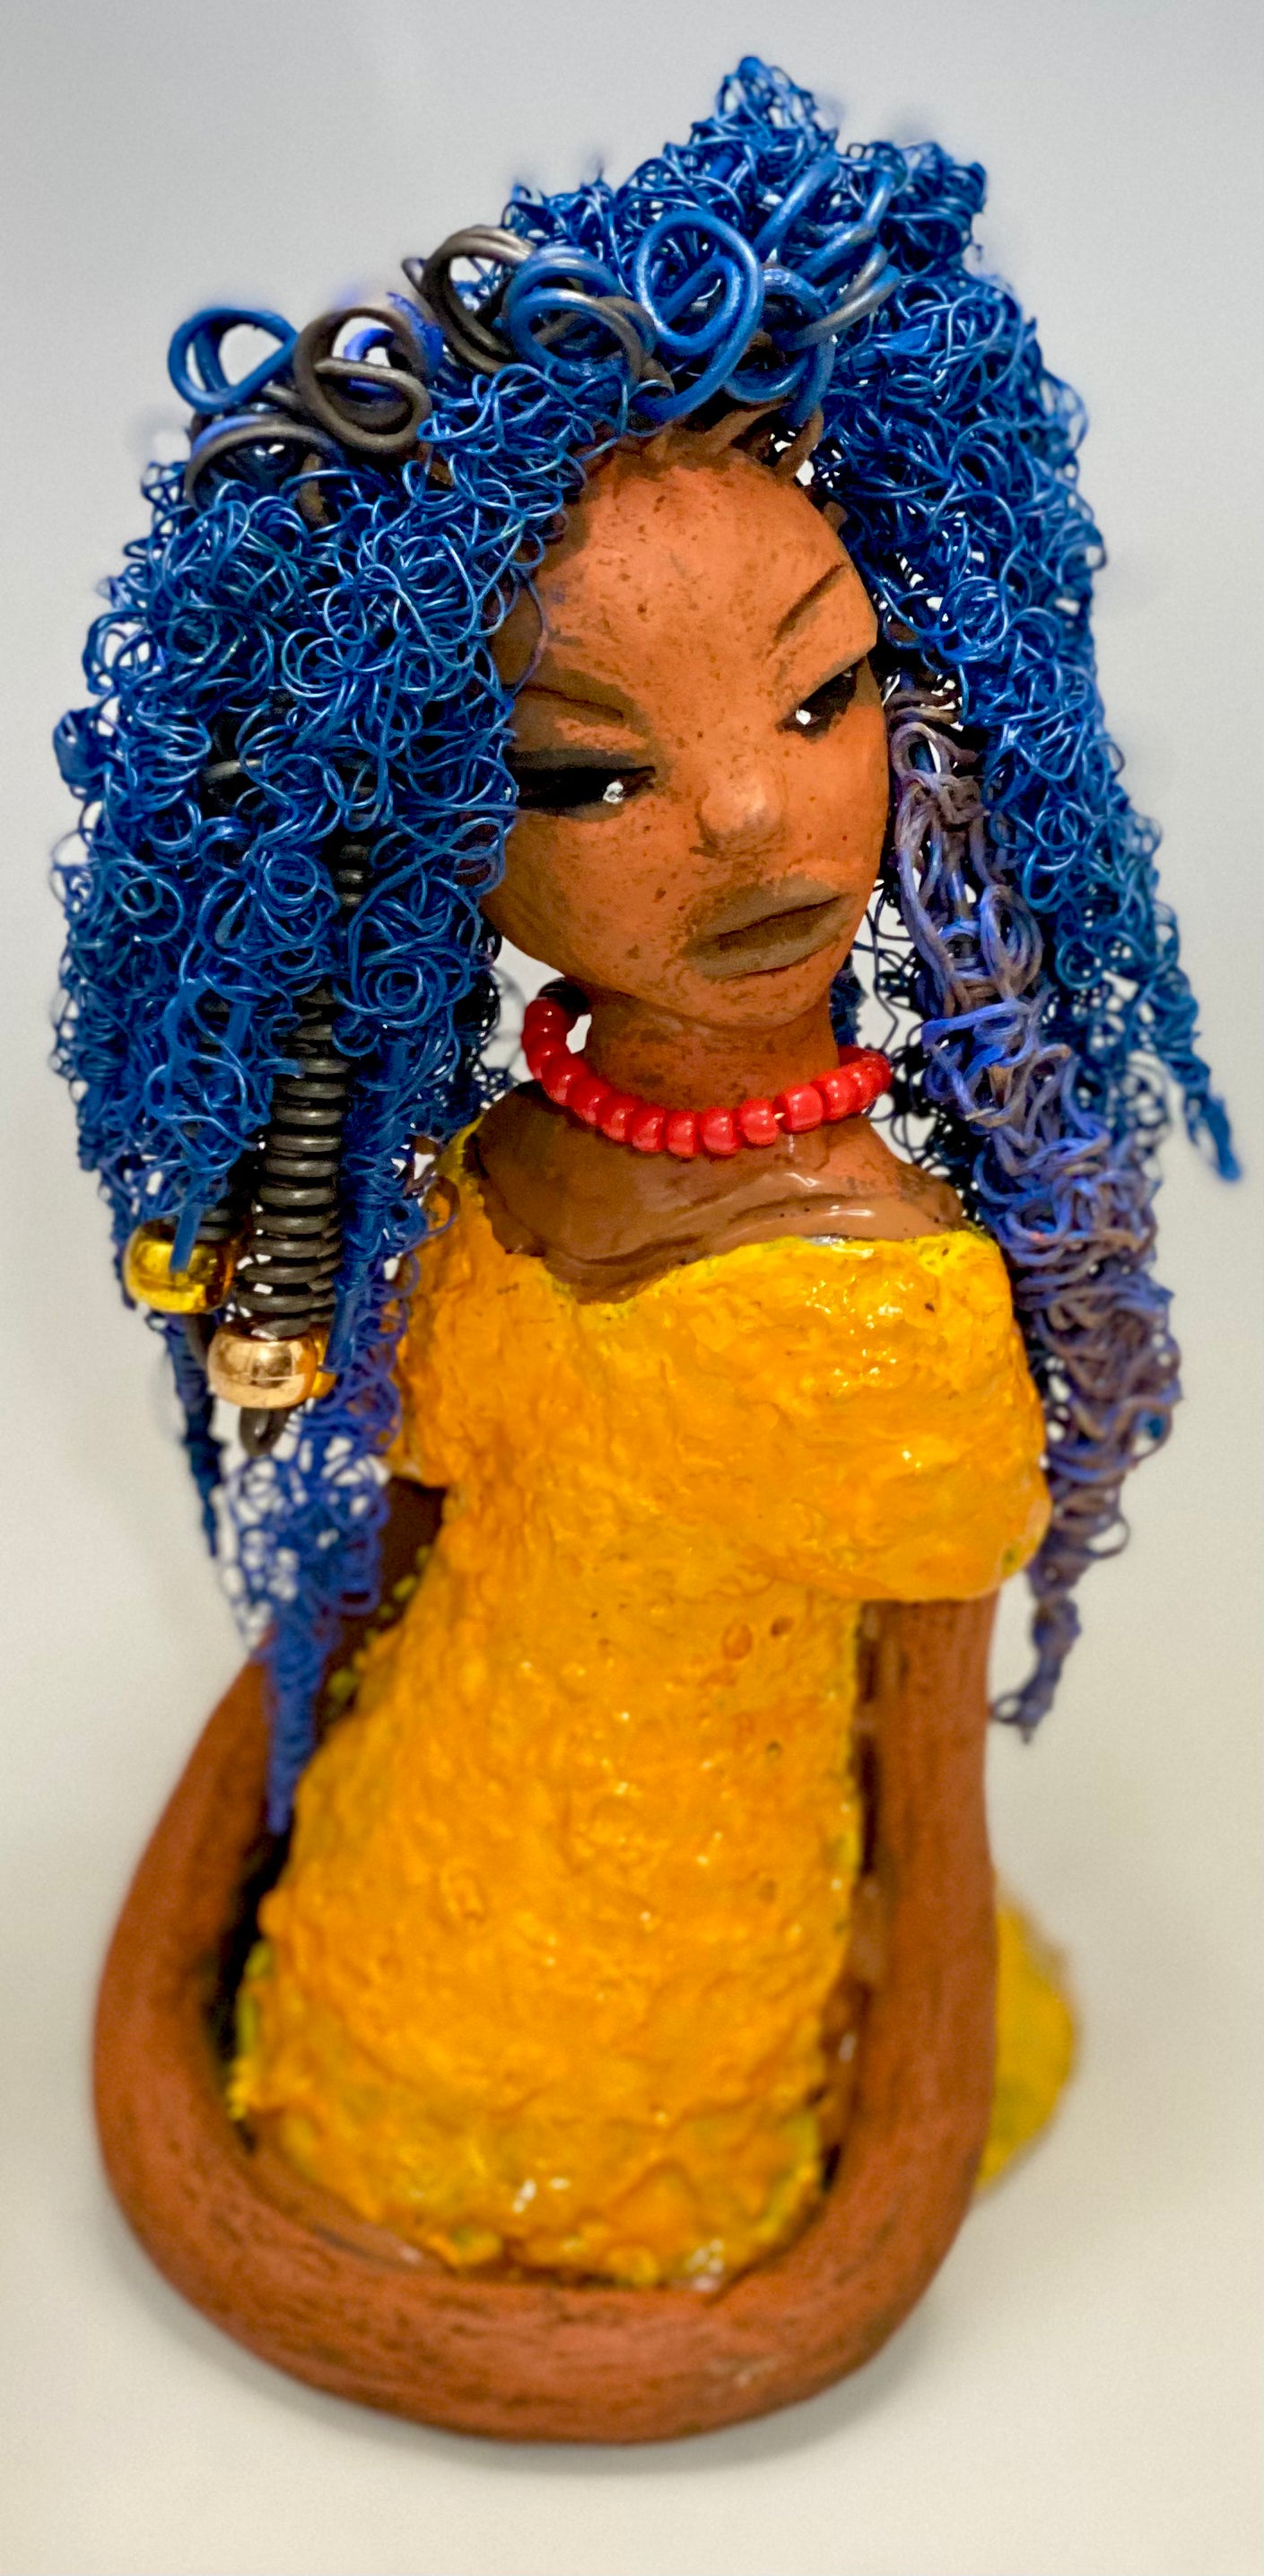 Makeba stands 8" x 5" x 5" and weighs 1.4 lbs. She has a lovely honey brown complexion with cocoa red lips. She has long twisted  blue wire locs hairstyle waist down!  Makeba has a sunset yellow red glazed dress. She has over 75 feet of 16 and 24 gauge blue wire for hair. It took over 5 hours just to do her hair! With  eyes wide opened and a subdue look, Makeba has hope of finding a new home.